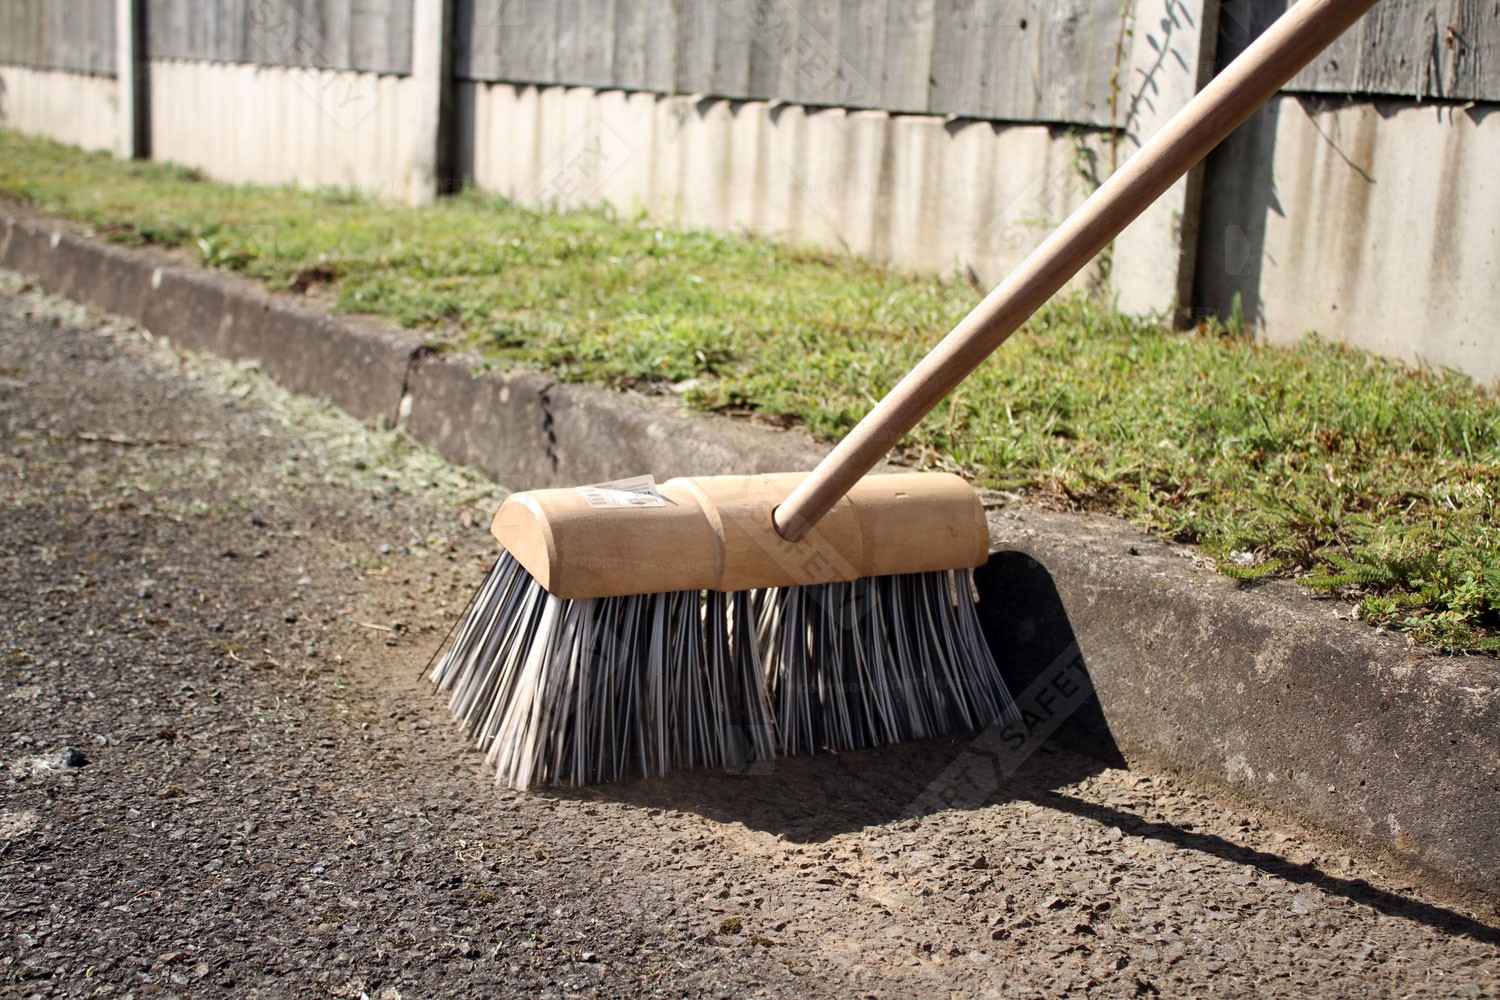 Yard, garden broom being used to sweep up grass cuttings